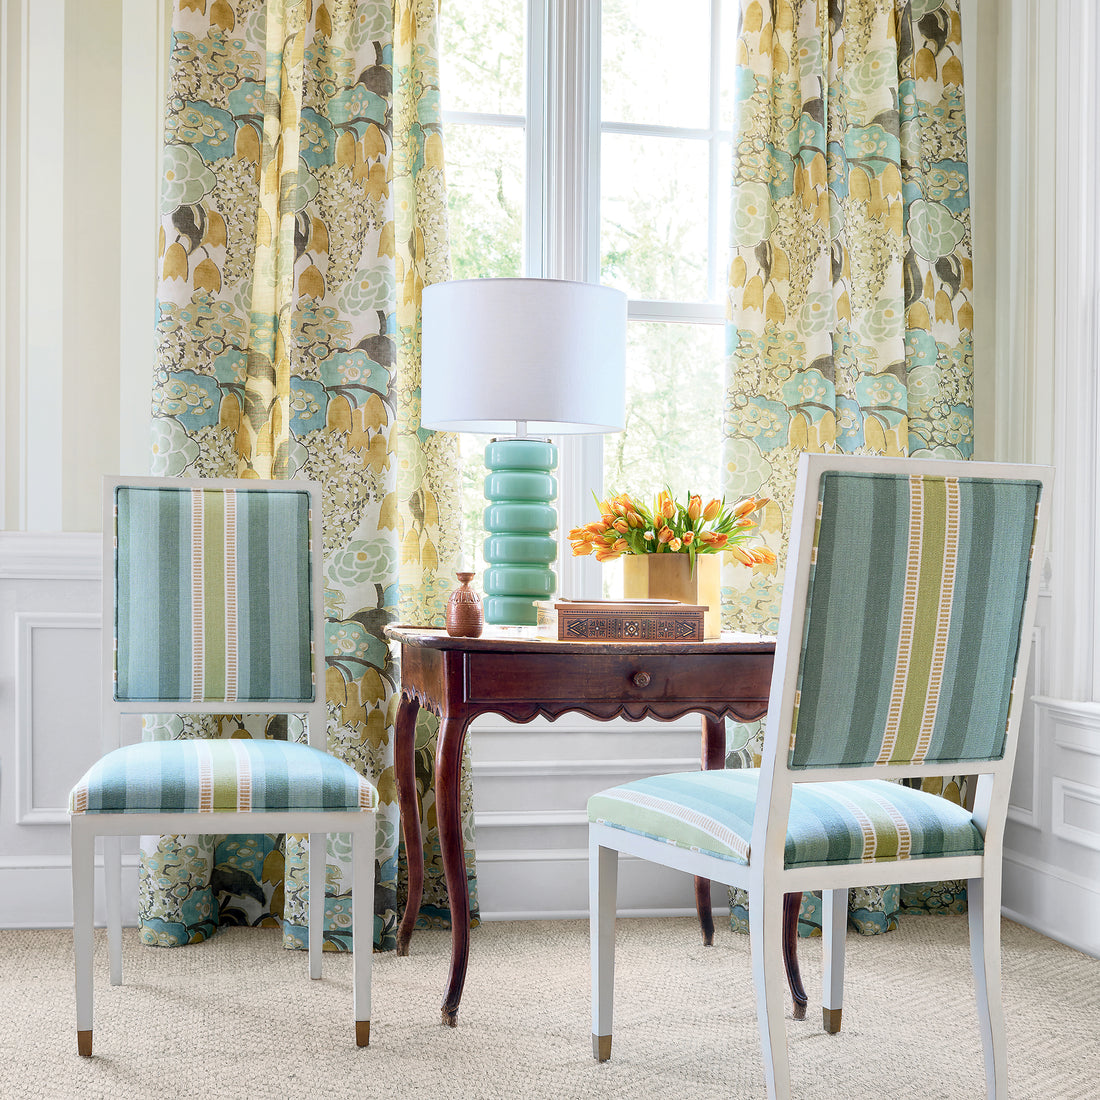 Lauderdale Dining Chairs in Dearden Stripe woven fabric in Turquoise and Green